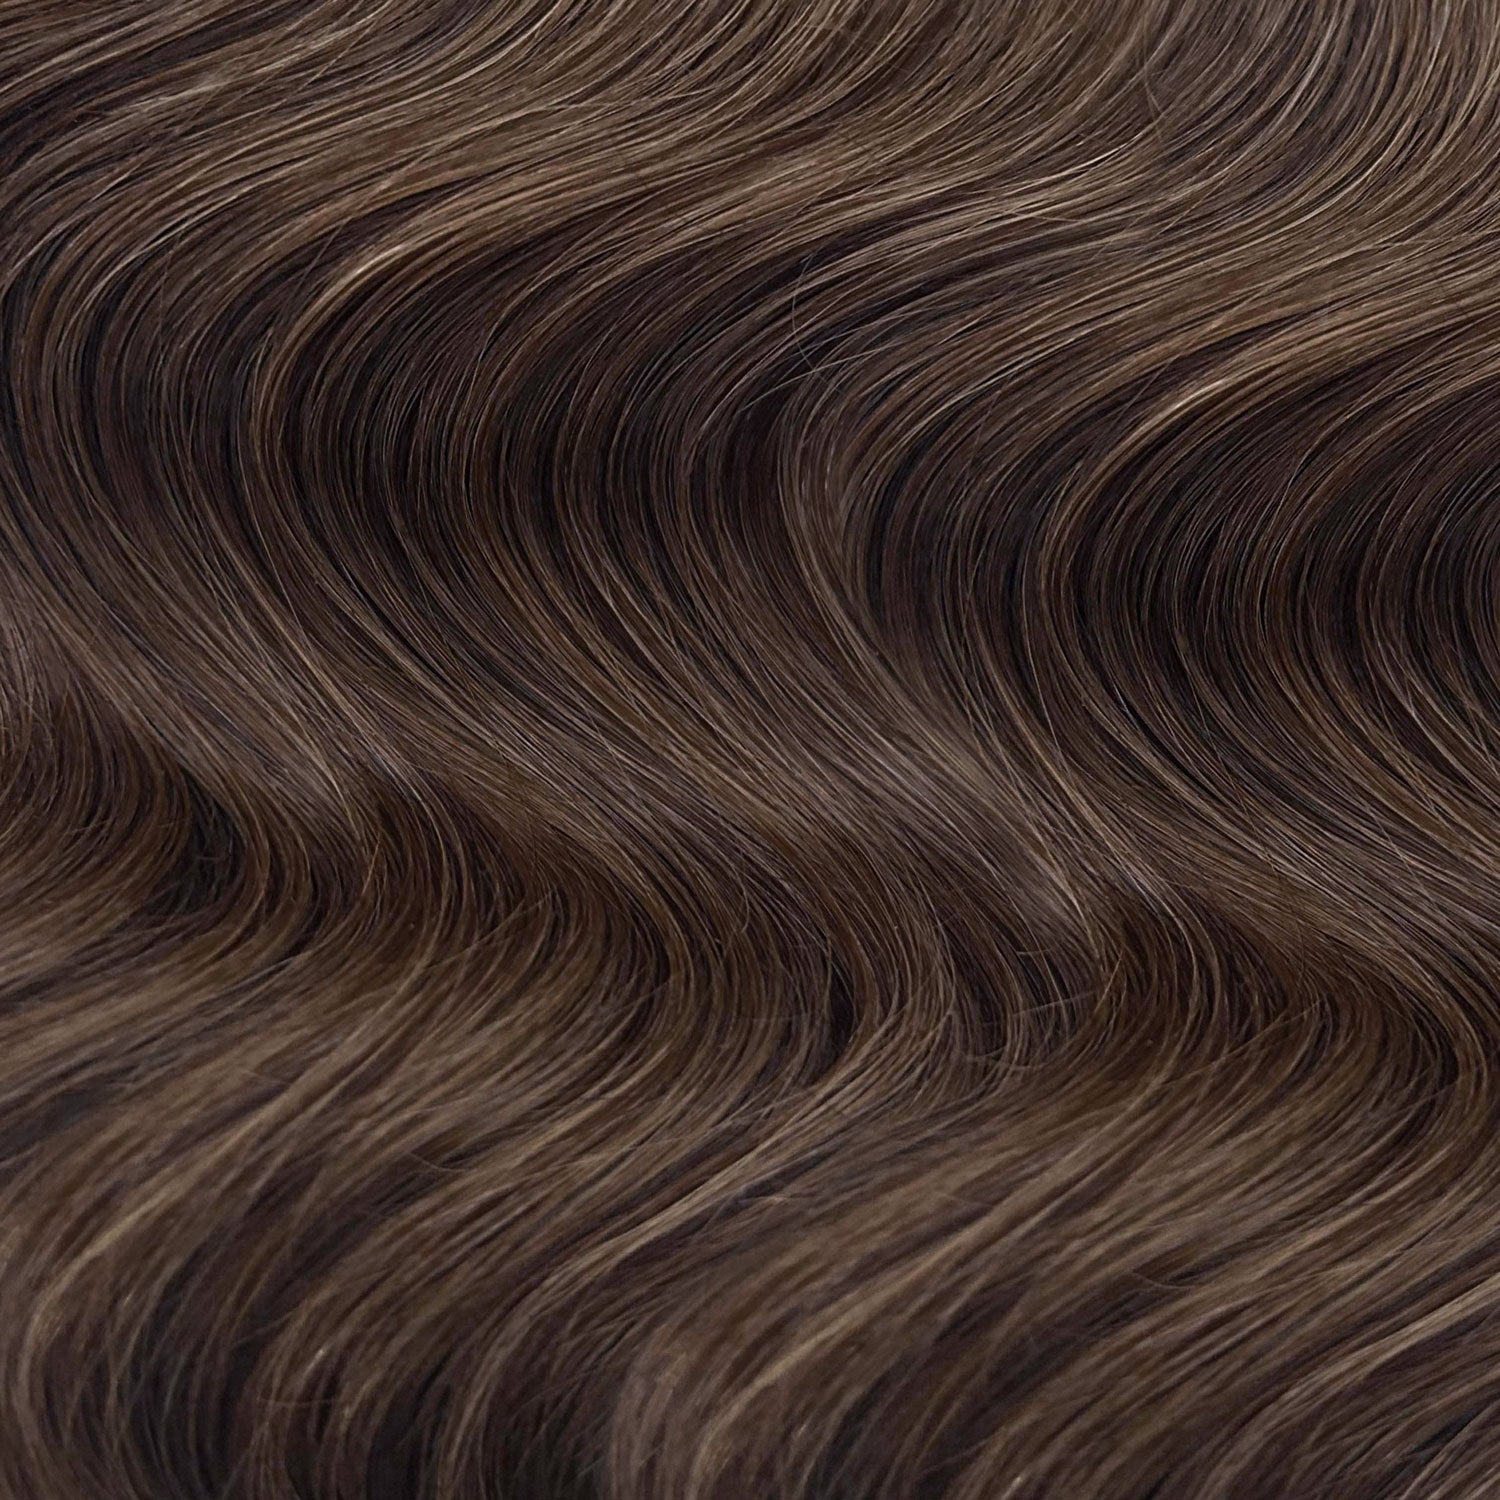 Easy-to-use Hair Extensions for a seamless blend.